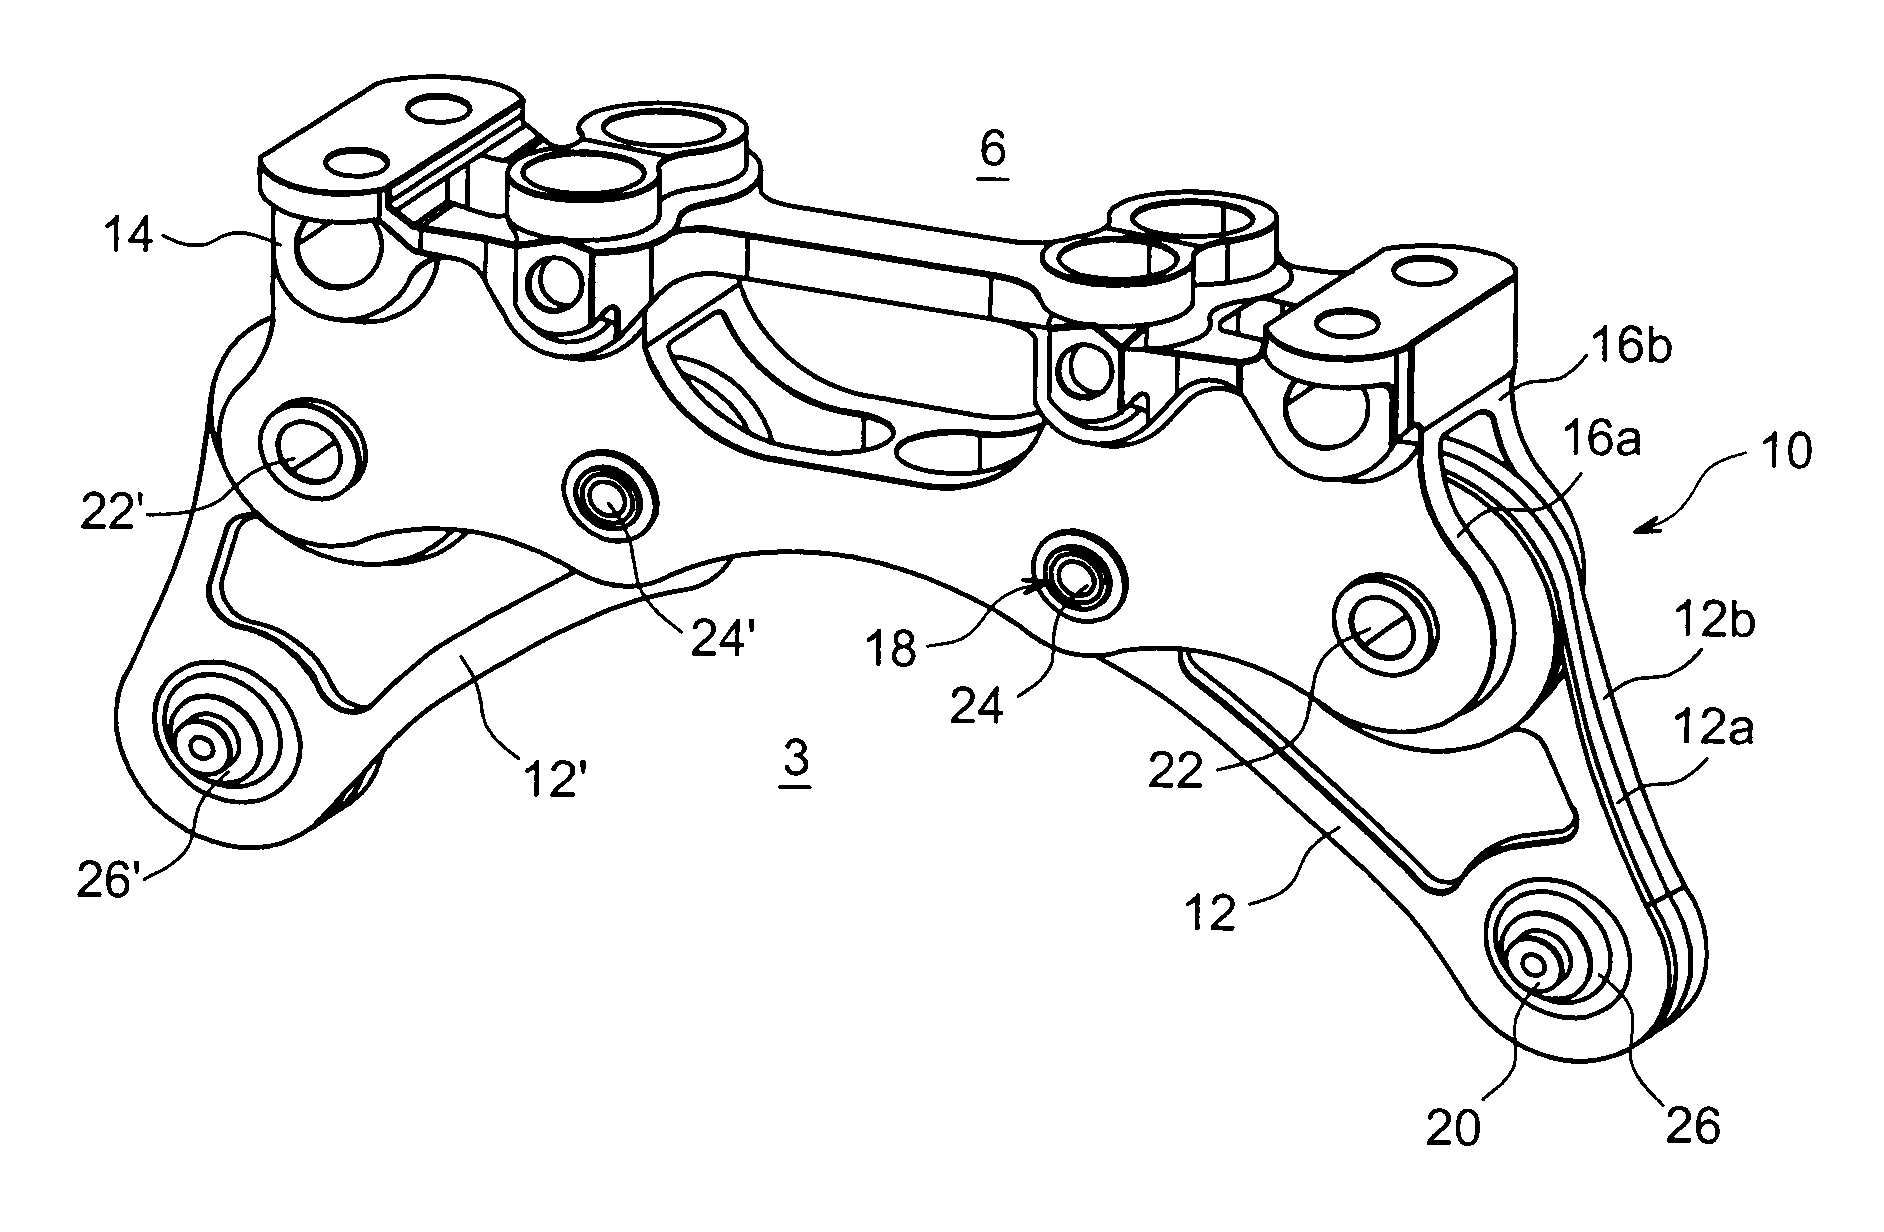 Two-shackle aircraft engine attachment